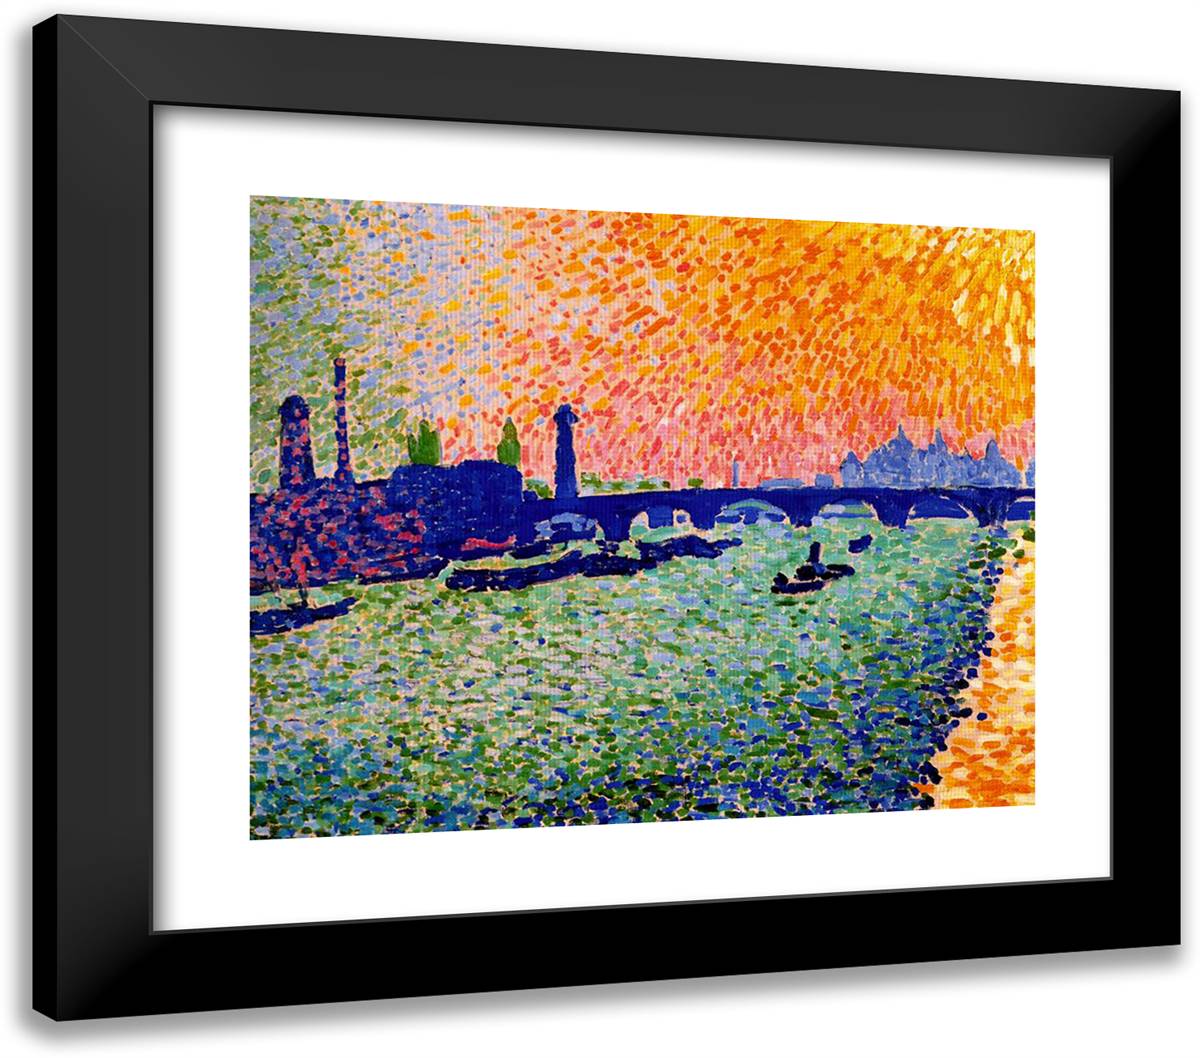 The Bridge, VIew on the River 23x20 Black Modern Wood Framed Art Print Poster by Derain, Andre